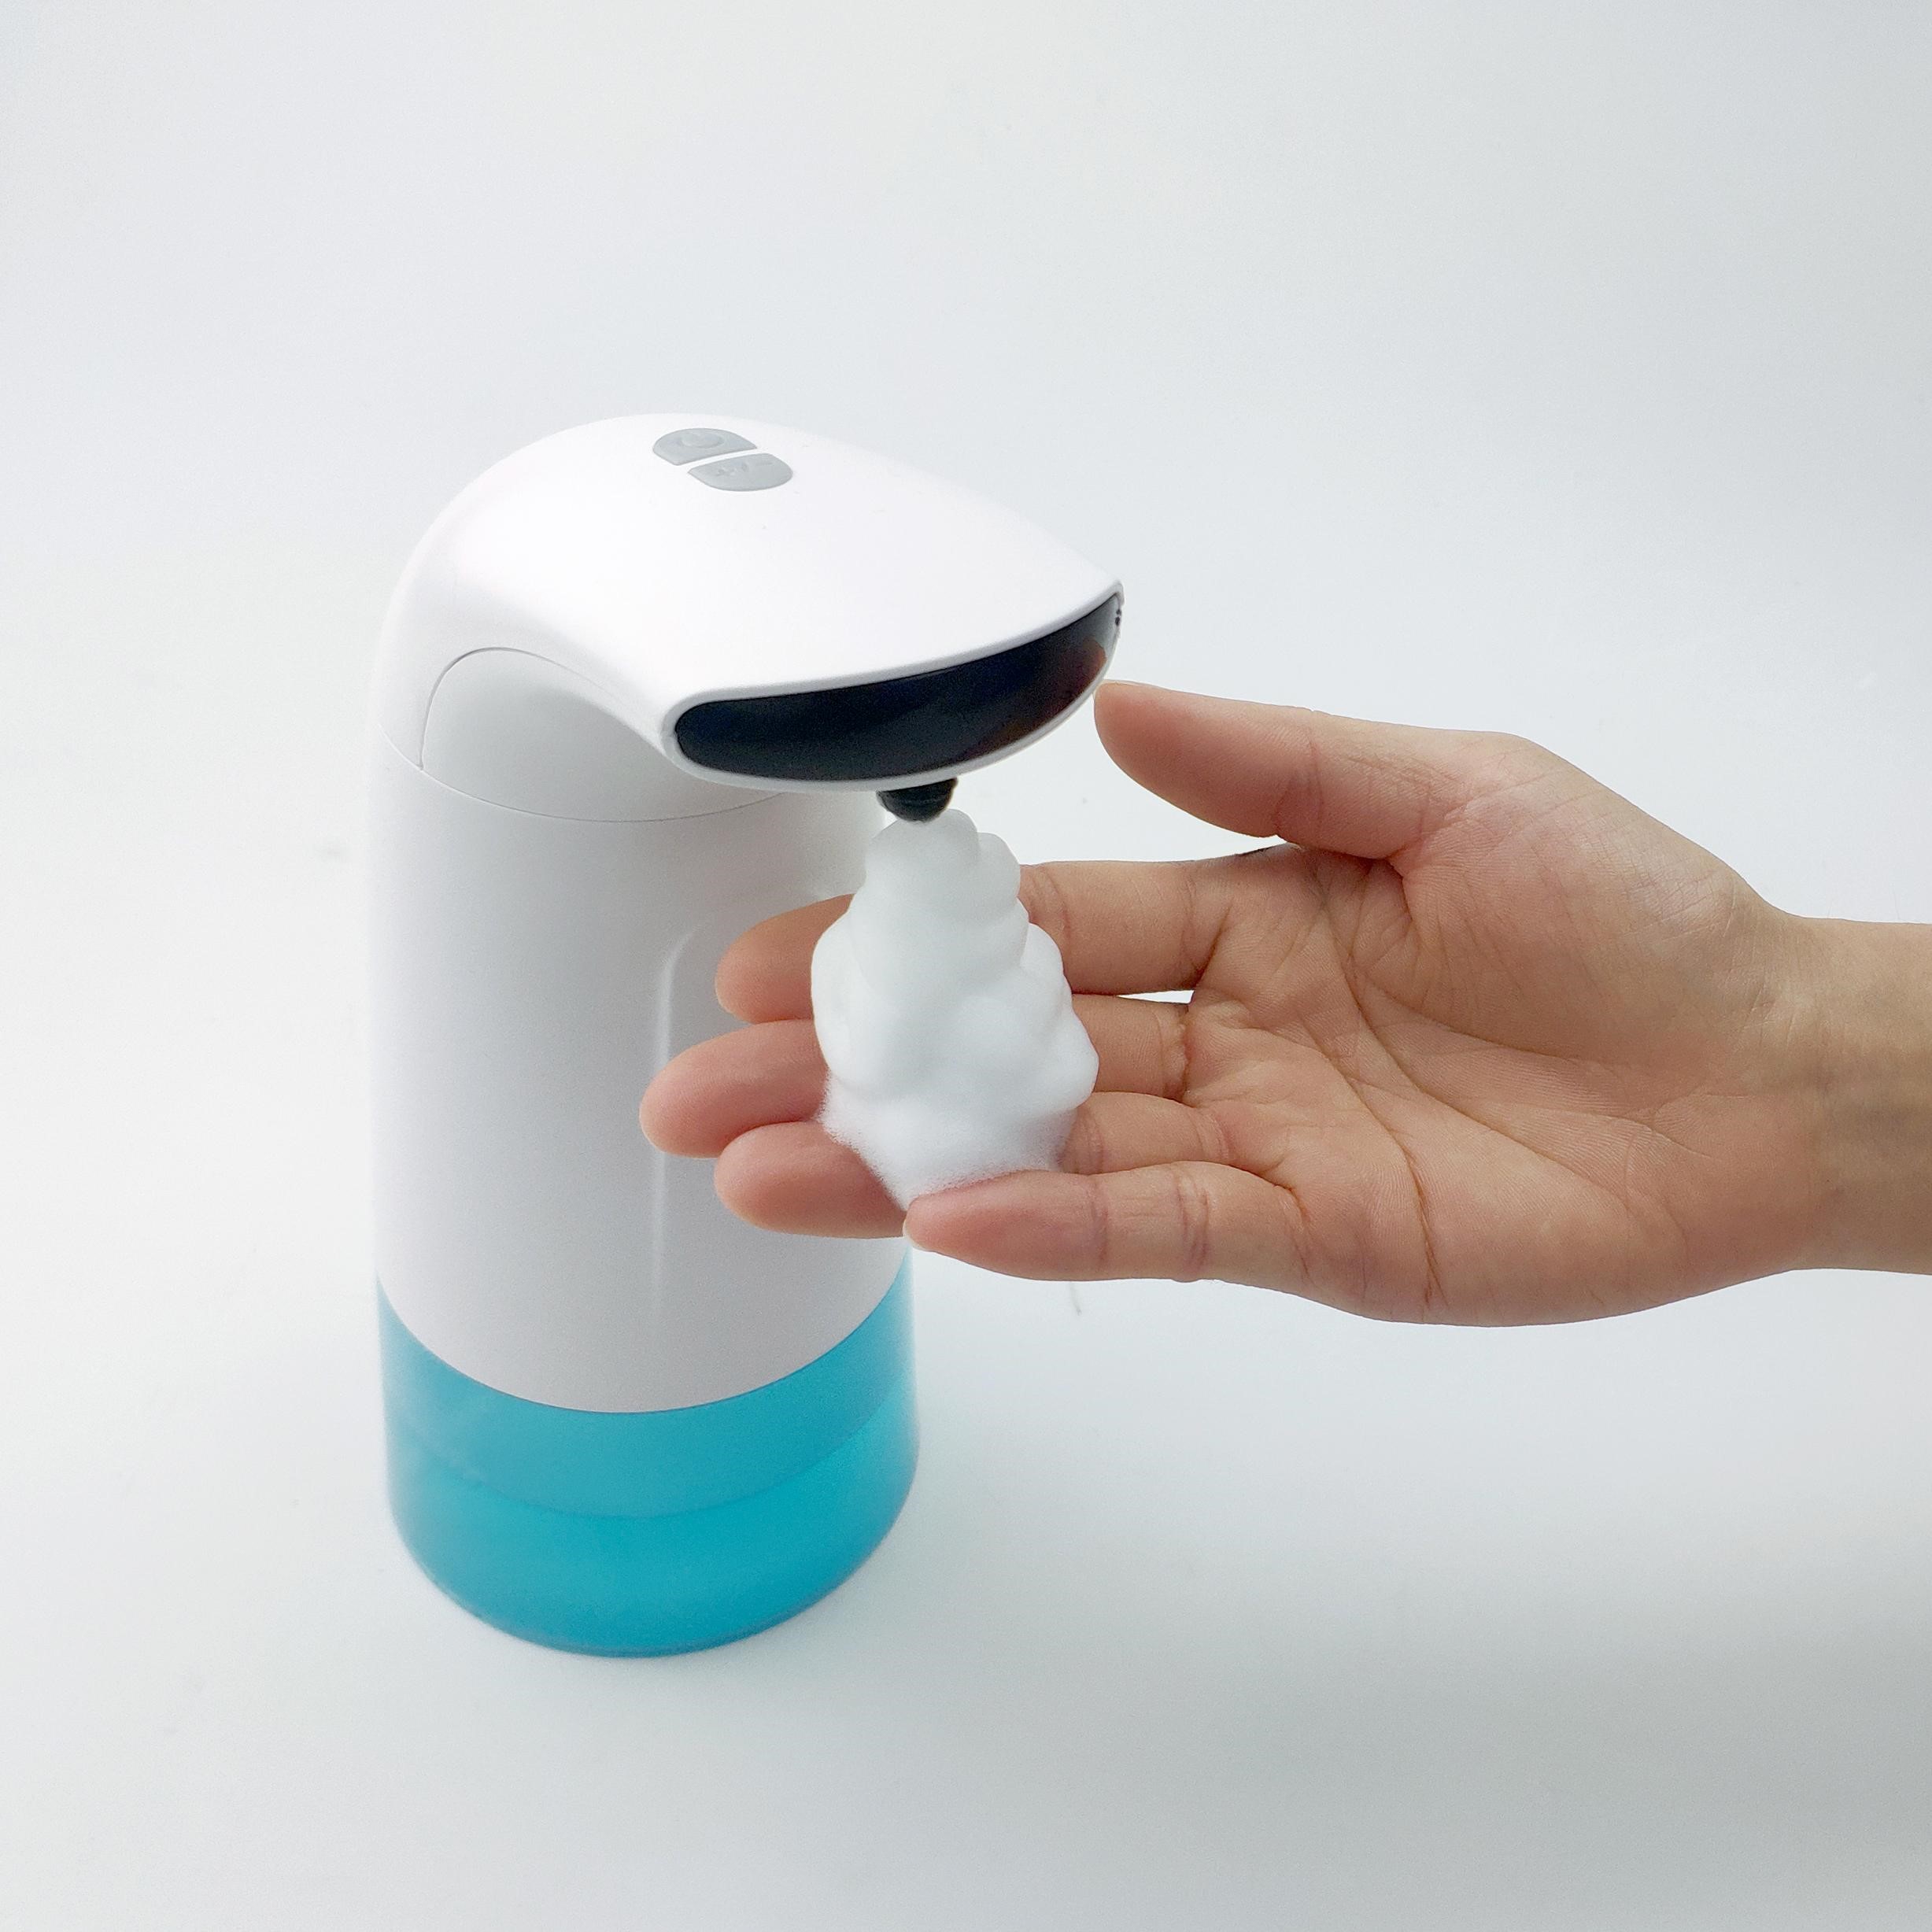 What is Foamatic– Automatic Soap Dispenser